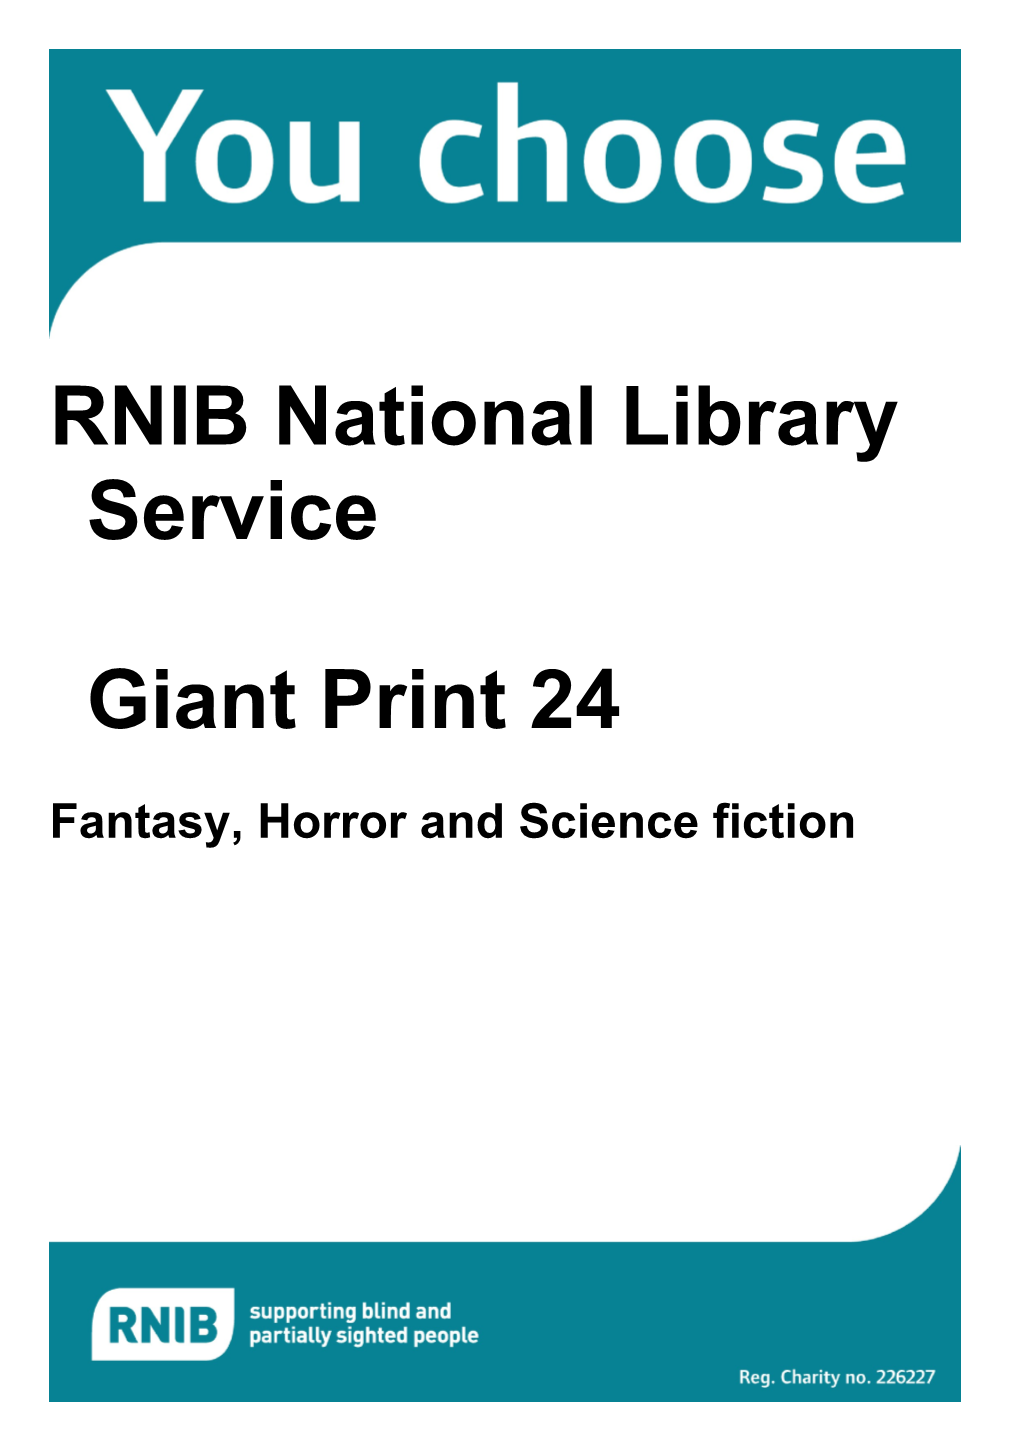 Horror, Fantasy and Science Fiction Book List for Giant Print (Word)